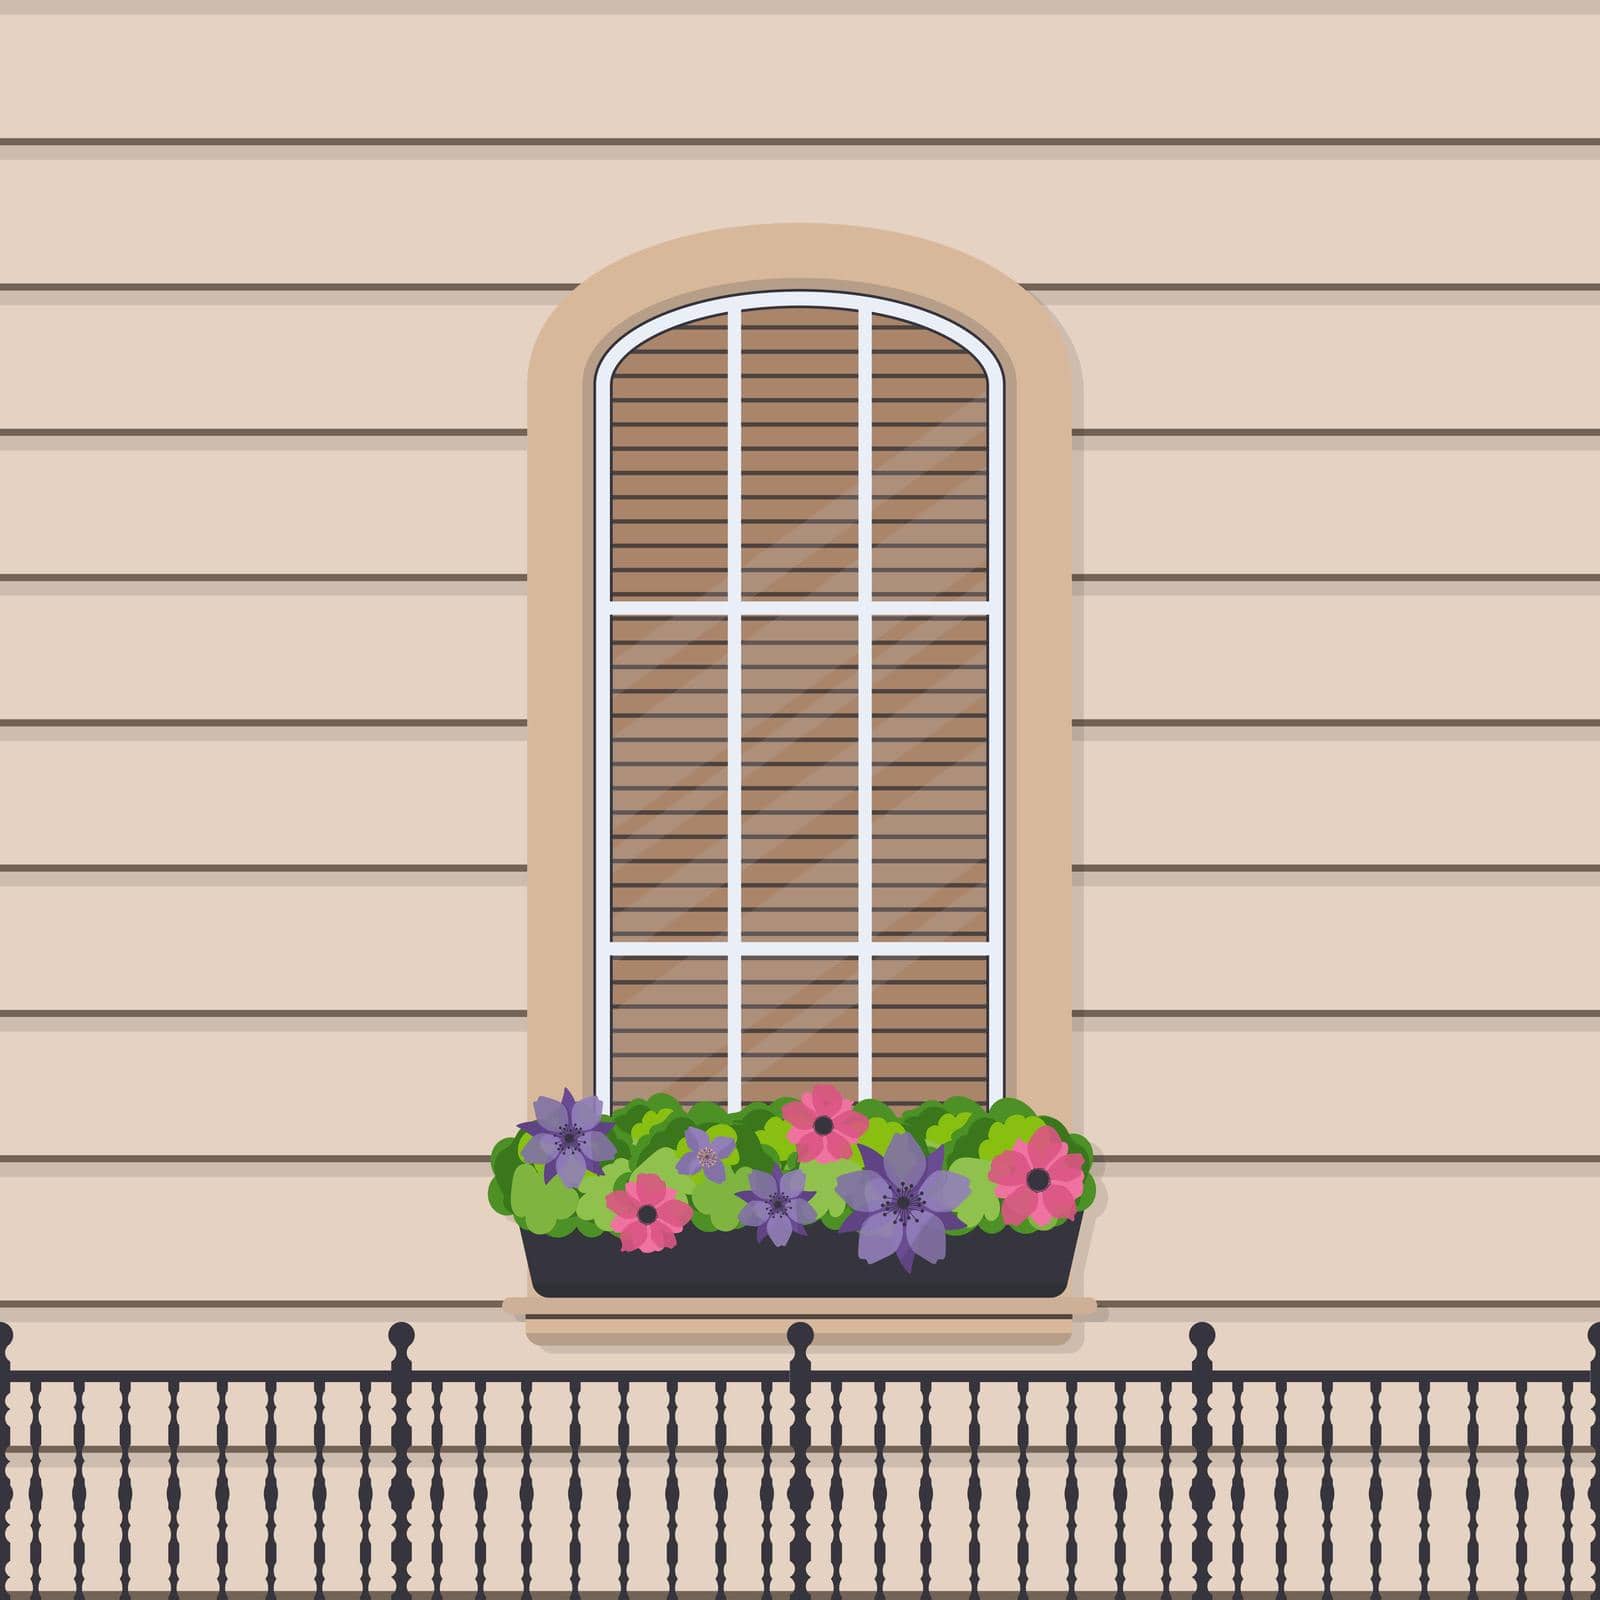 Semicircular window with flowers in a flat style. Window with shutters. Vector. by Javvani